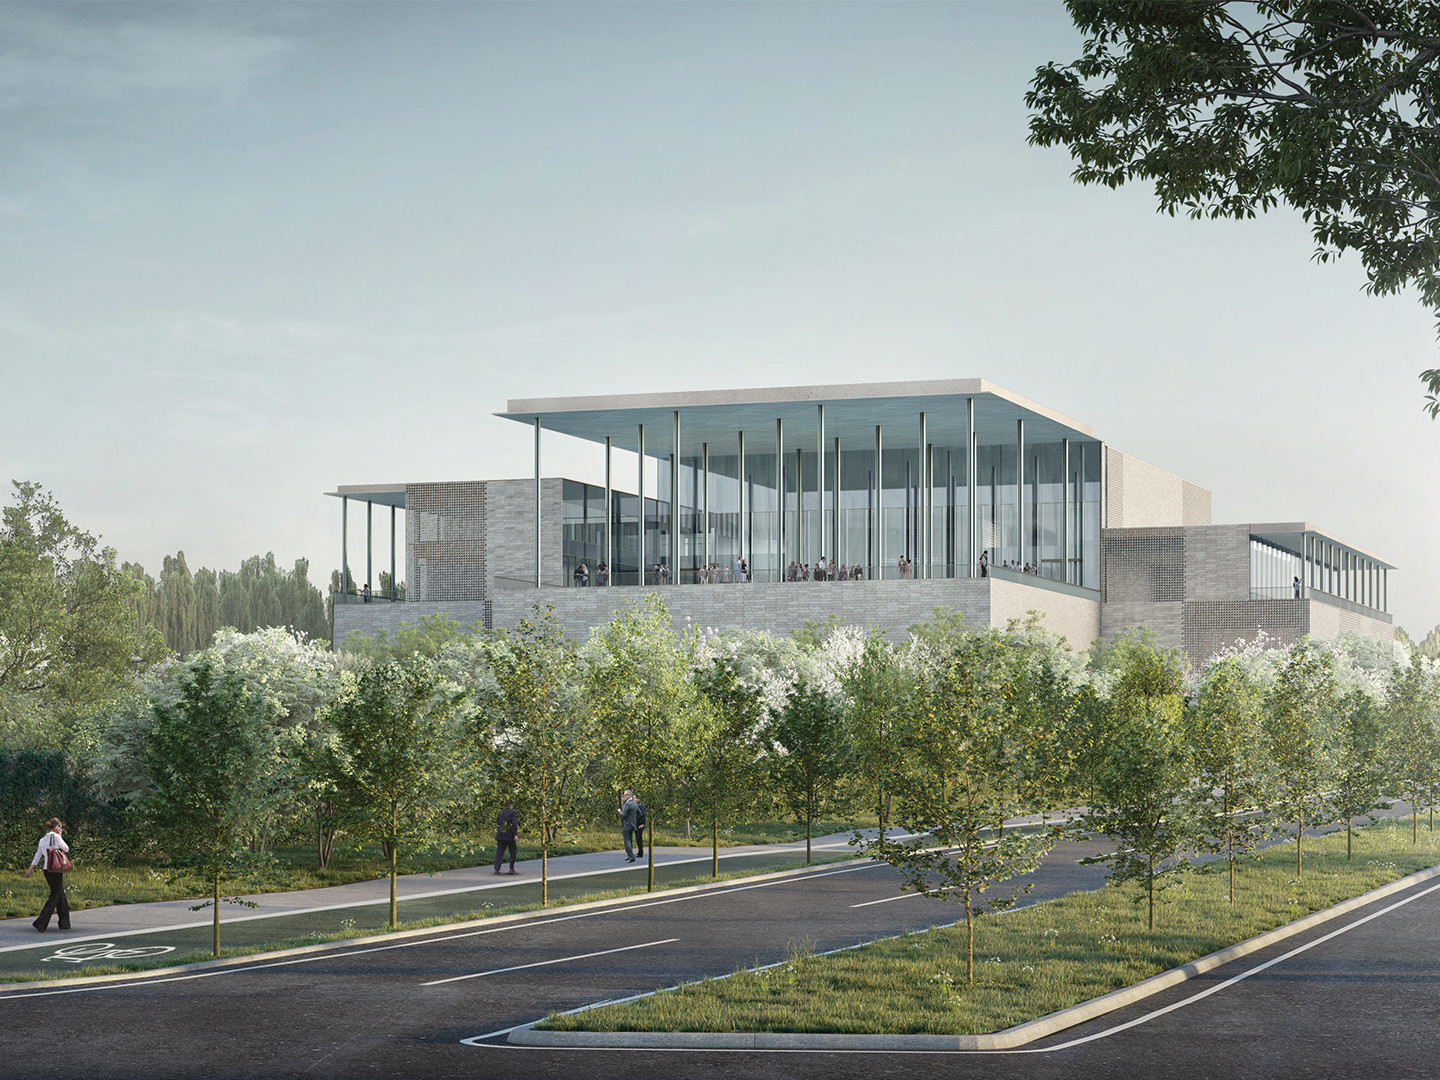 rendering of world's seventh ismaili center; a glass and stone building with a second level terrace overlooking a green park